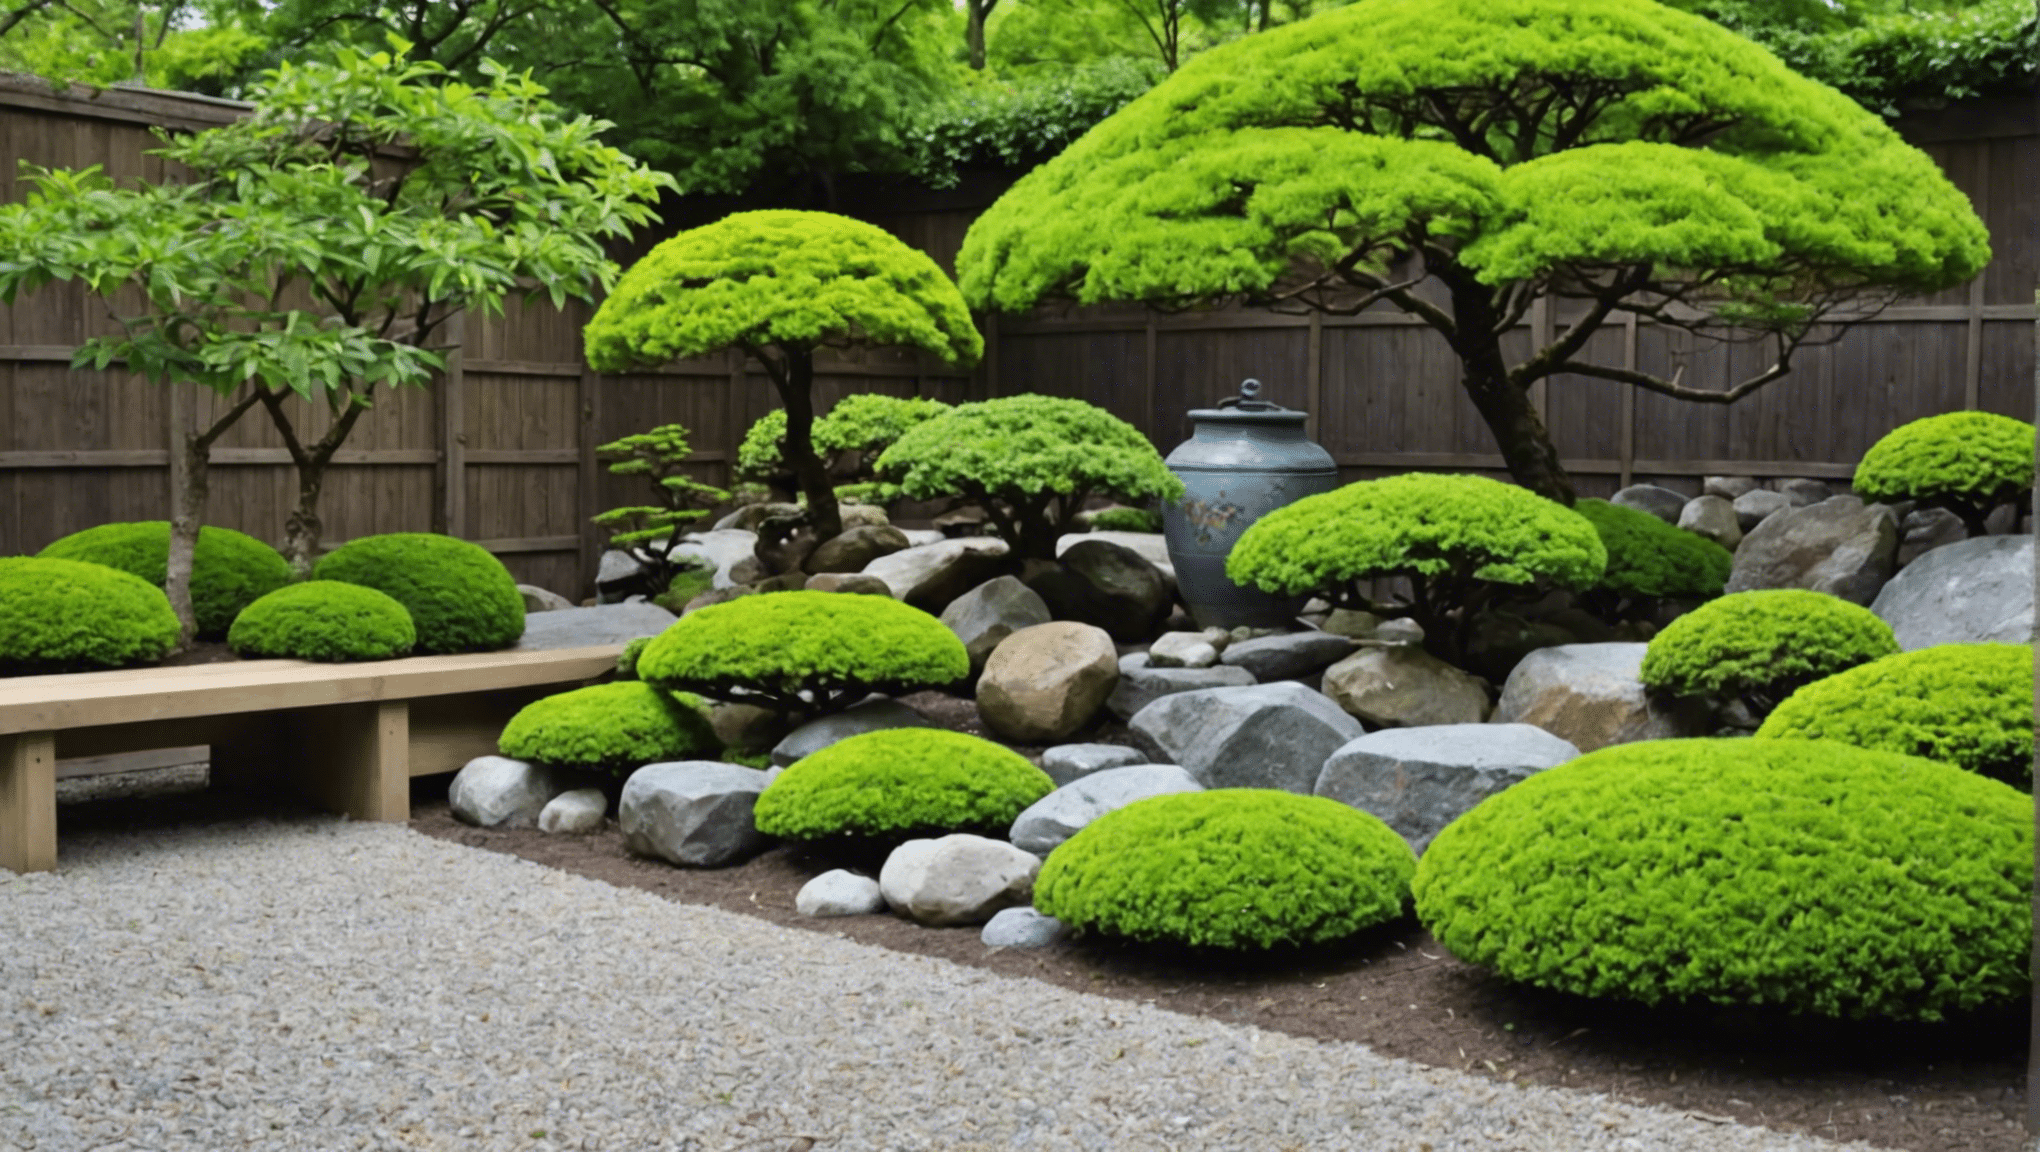 discover if japanese gardening tools hold the key to creating a stunning garden with expert insights and advice.